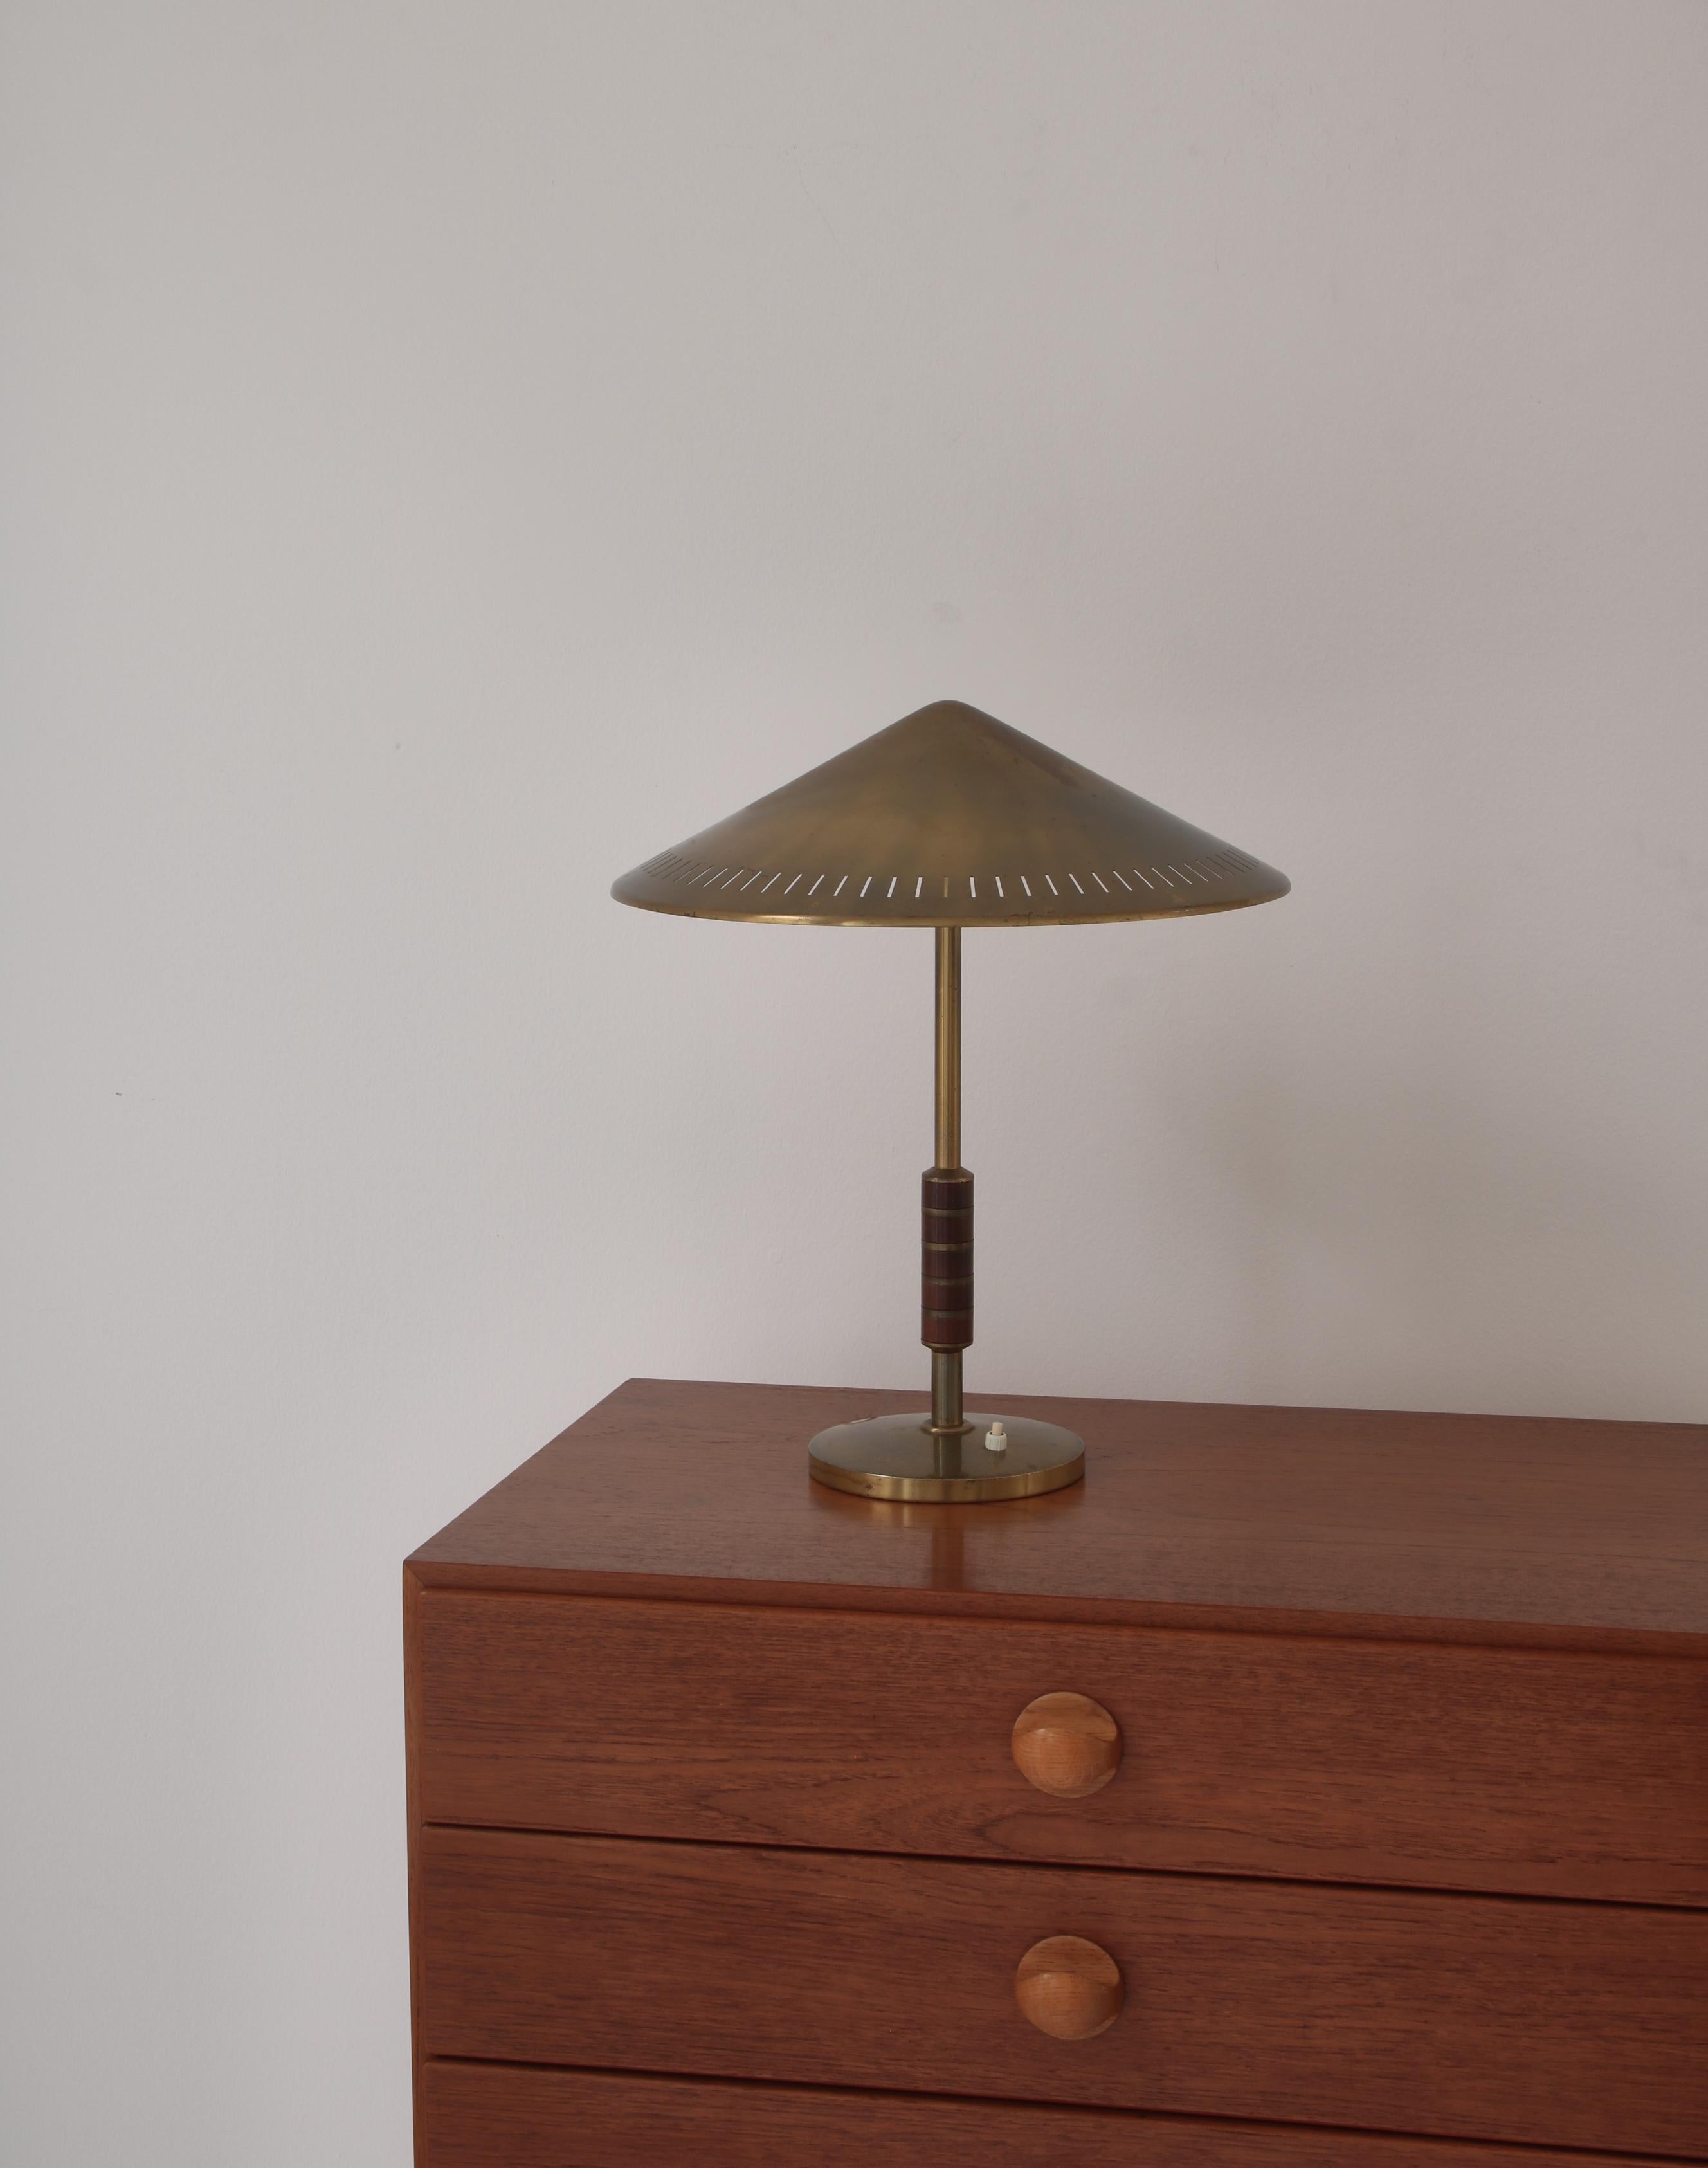 Rare and beautiful Danish Modern table lamp in solid brass with mahogany handle. Manufactured by LYFA, Copenhagen in the 1950s and designed by Danish designer Bent Karlby. The lamp has two light sources.